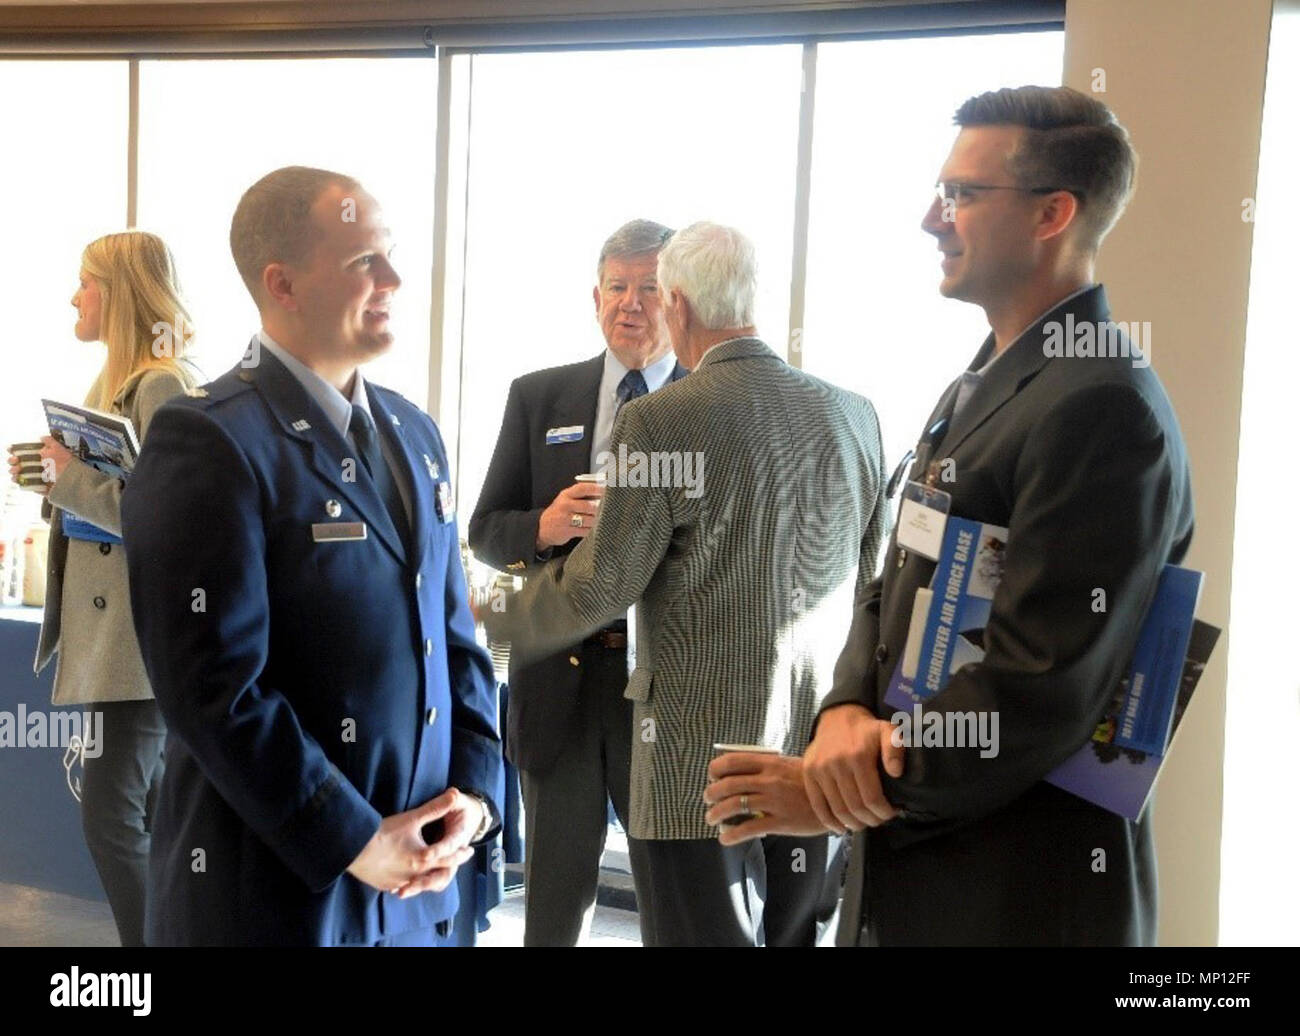 https://c8.alamy.com/comp/MP12FF/lt-col-peter-norsky-commander-of-the-2nd-space-operations-squadron-speaks-with-his-honorary-commander-john-olson-during-the-annual-state-of-the-base-at-schriever-air-force-base-colorado-march-7-2018-since-2015-state-of-the-base-has-provided-community-members-and-leaders-the-opportunity-to-learn-about-the-schriever-mission-and-strengthen-ties-MP12FF.jpg